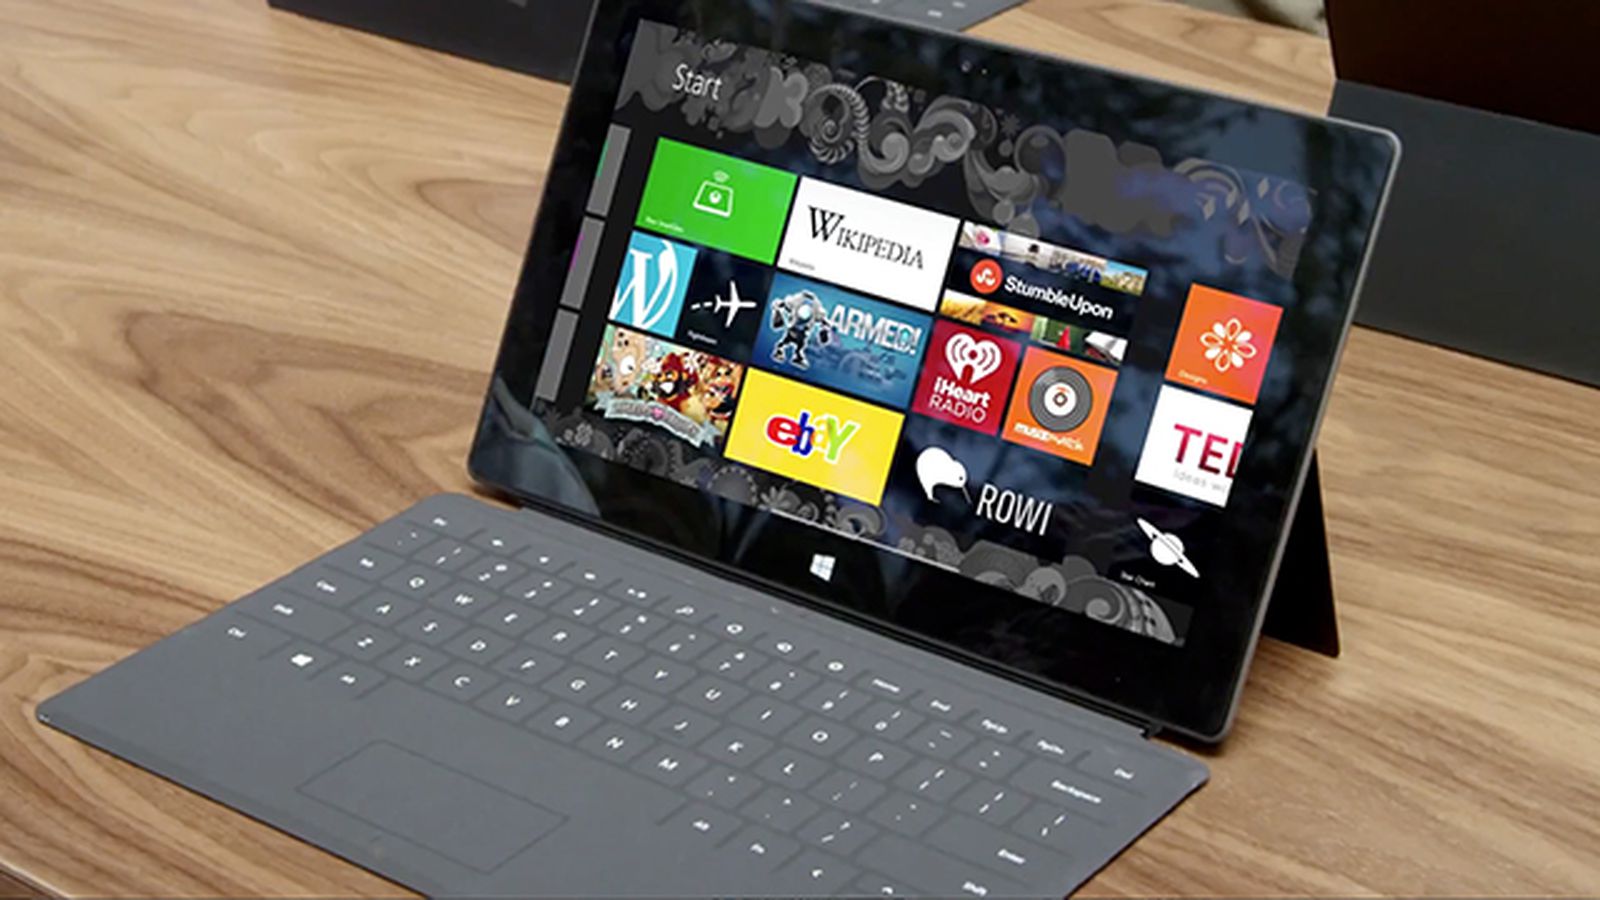 Microsoft Surface RT goes on sale at Best Buy and Staples today - The Verge